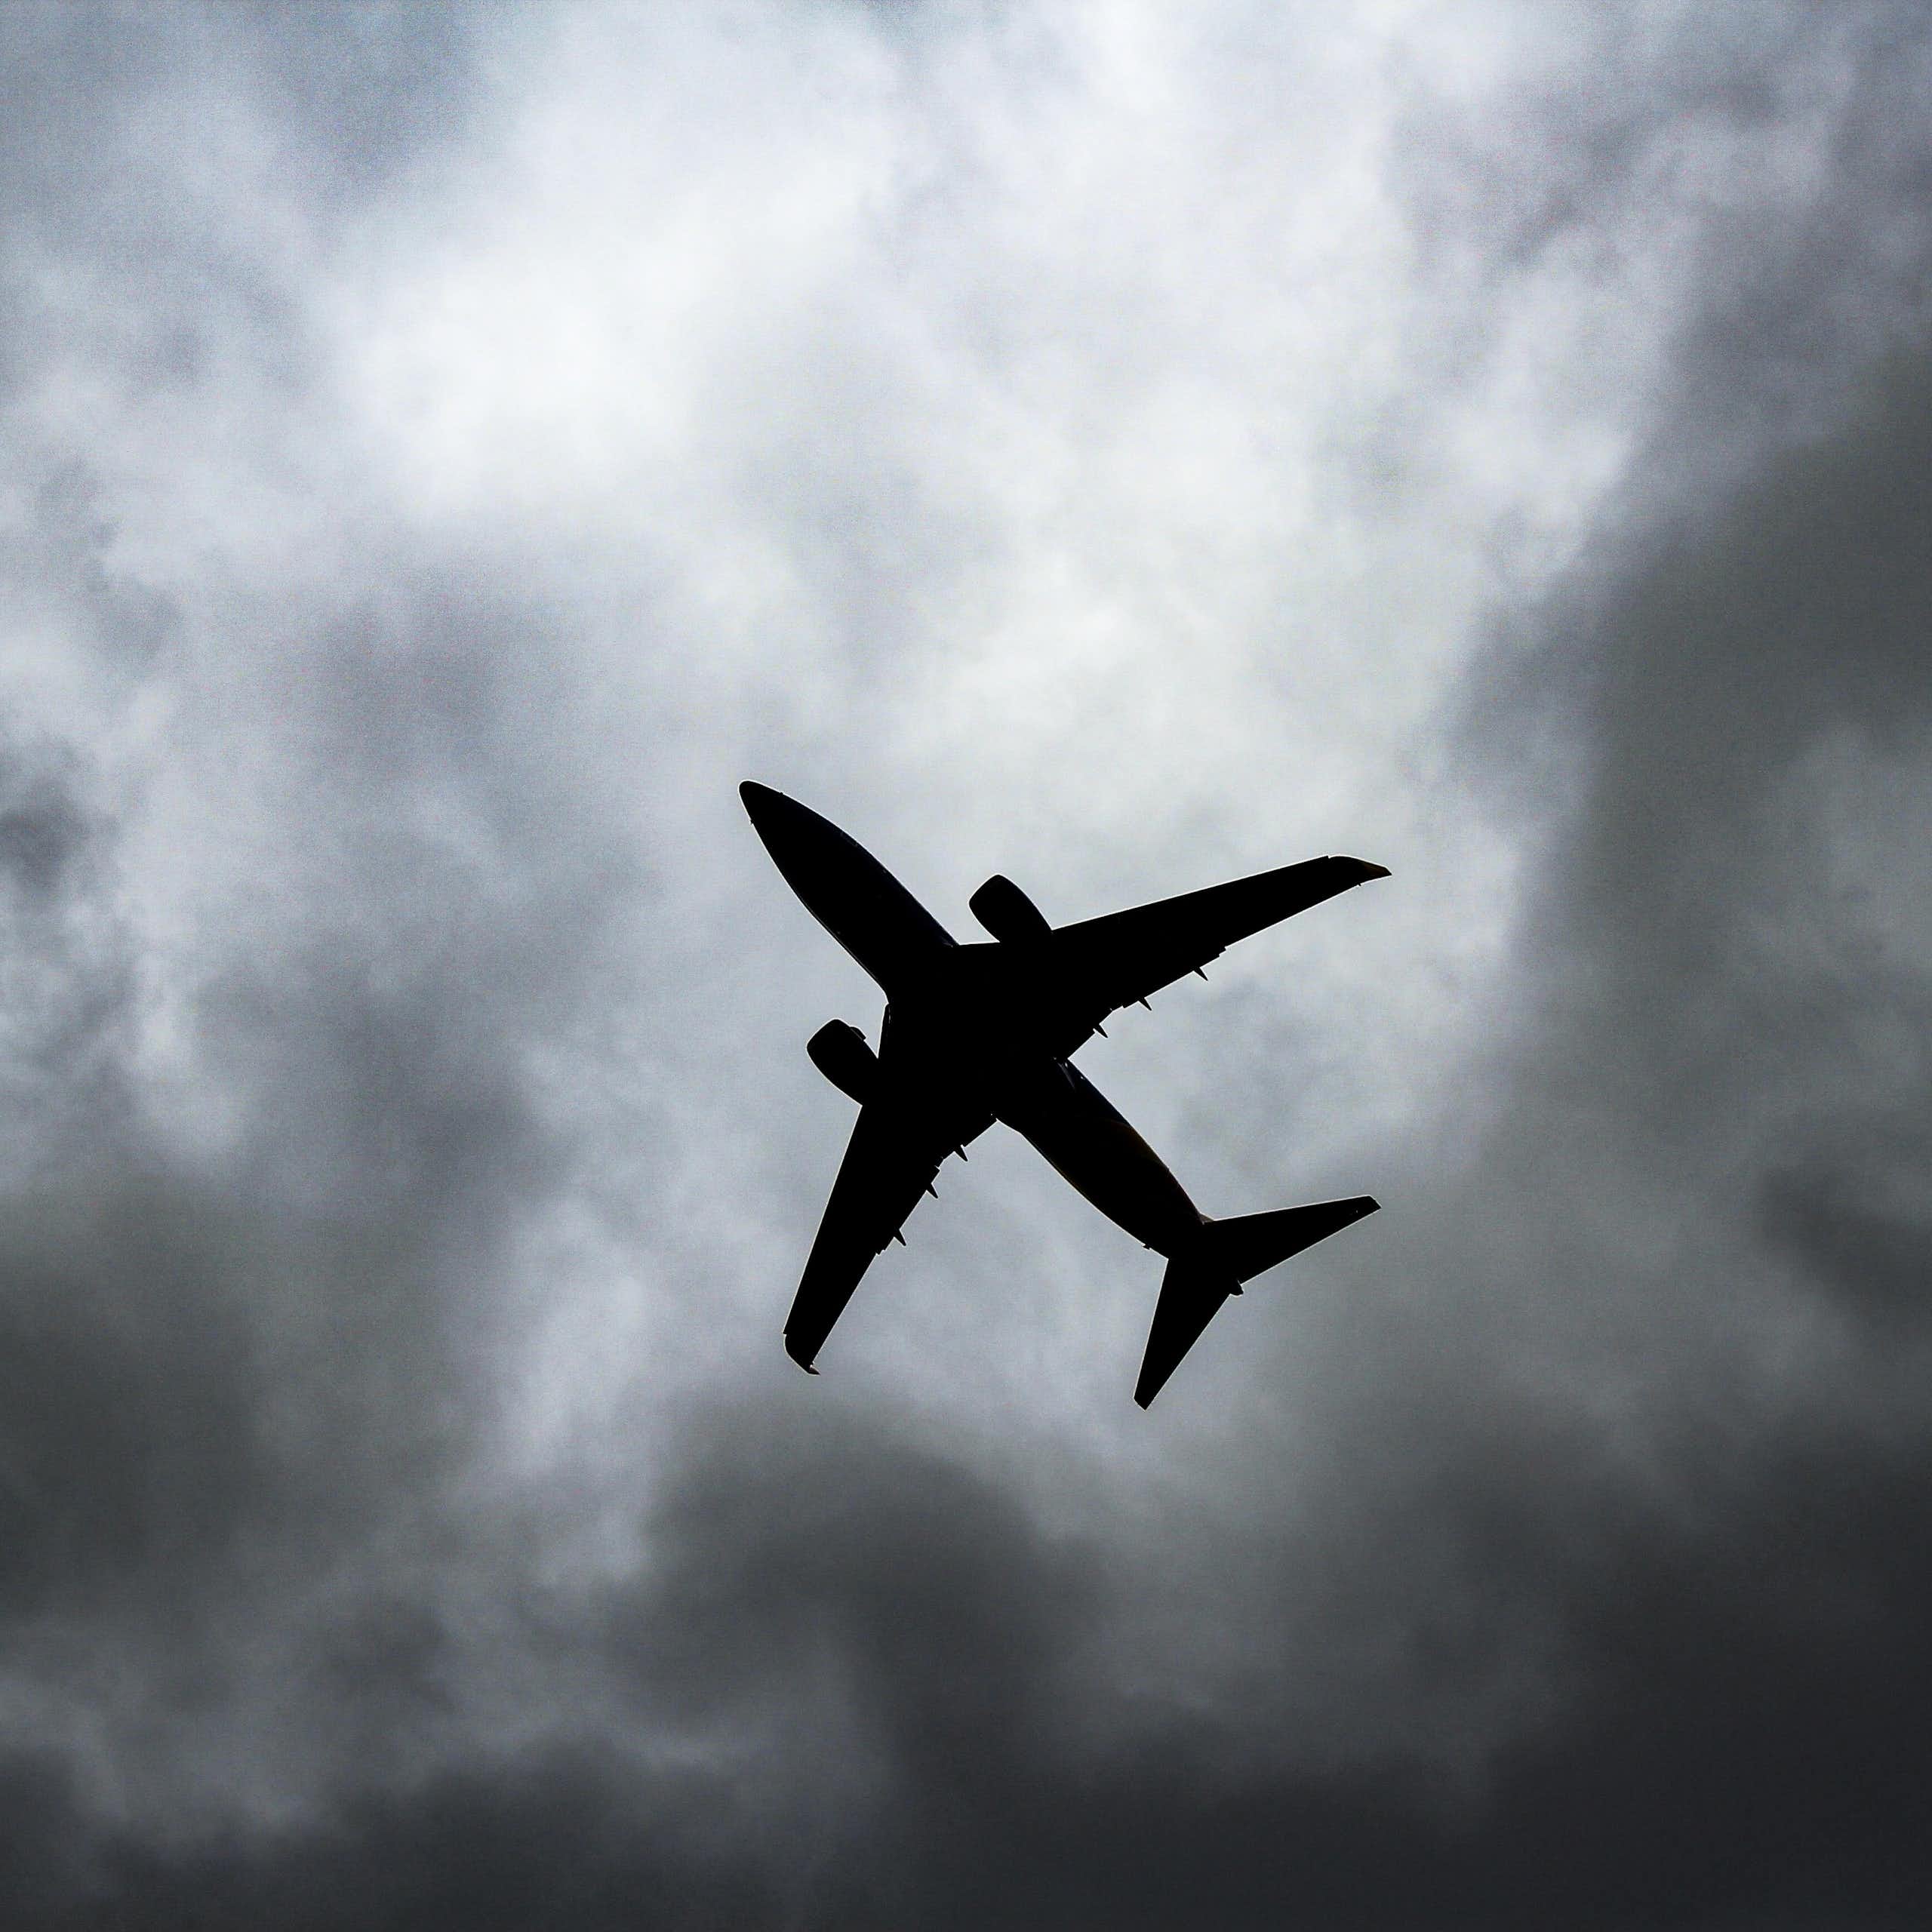 Are some routes more prone to air turbulence? Will climate change make it worse? Your questions answered